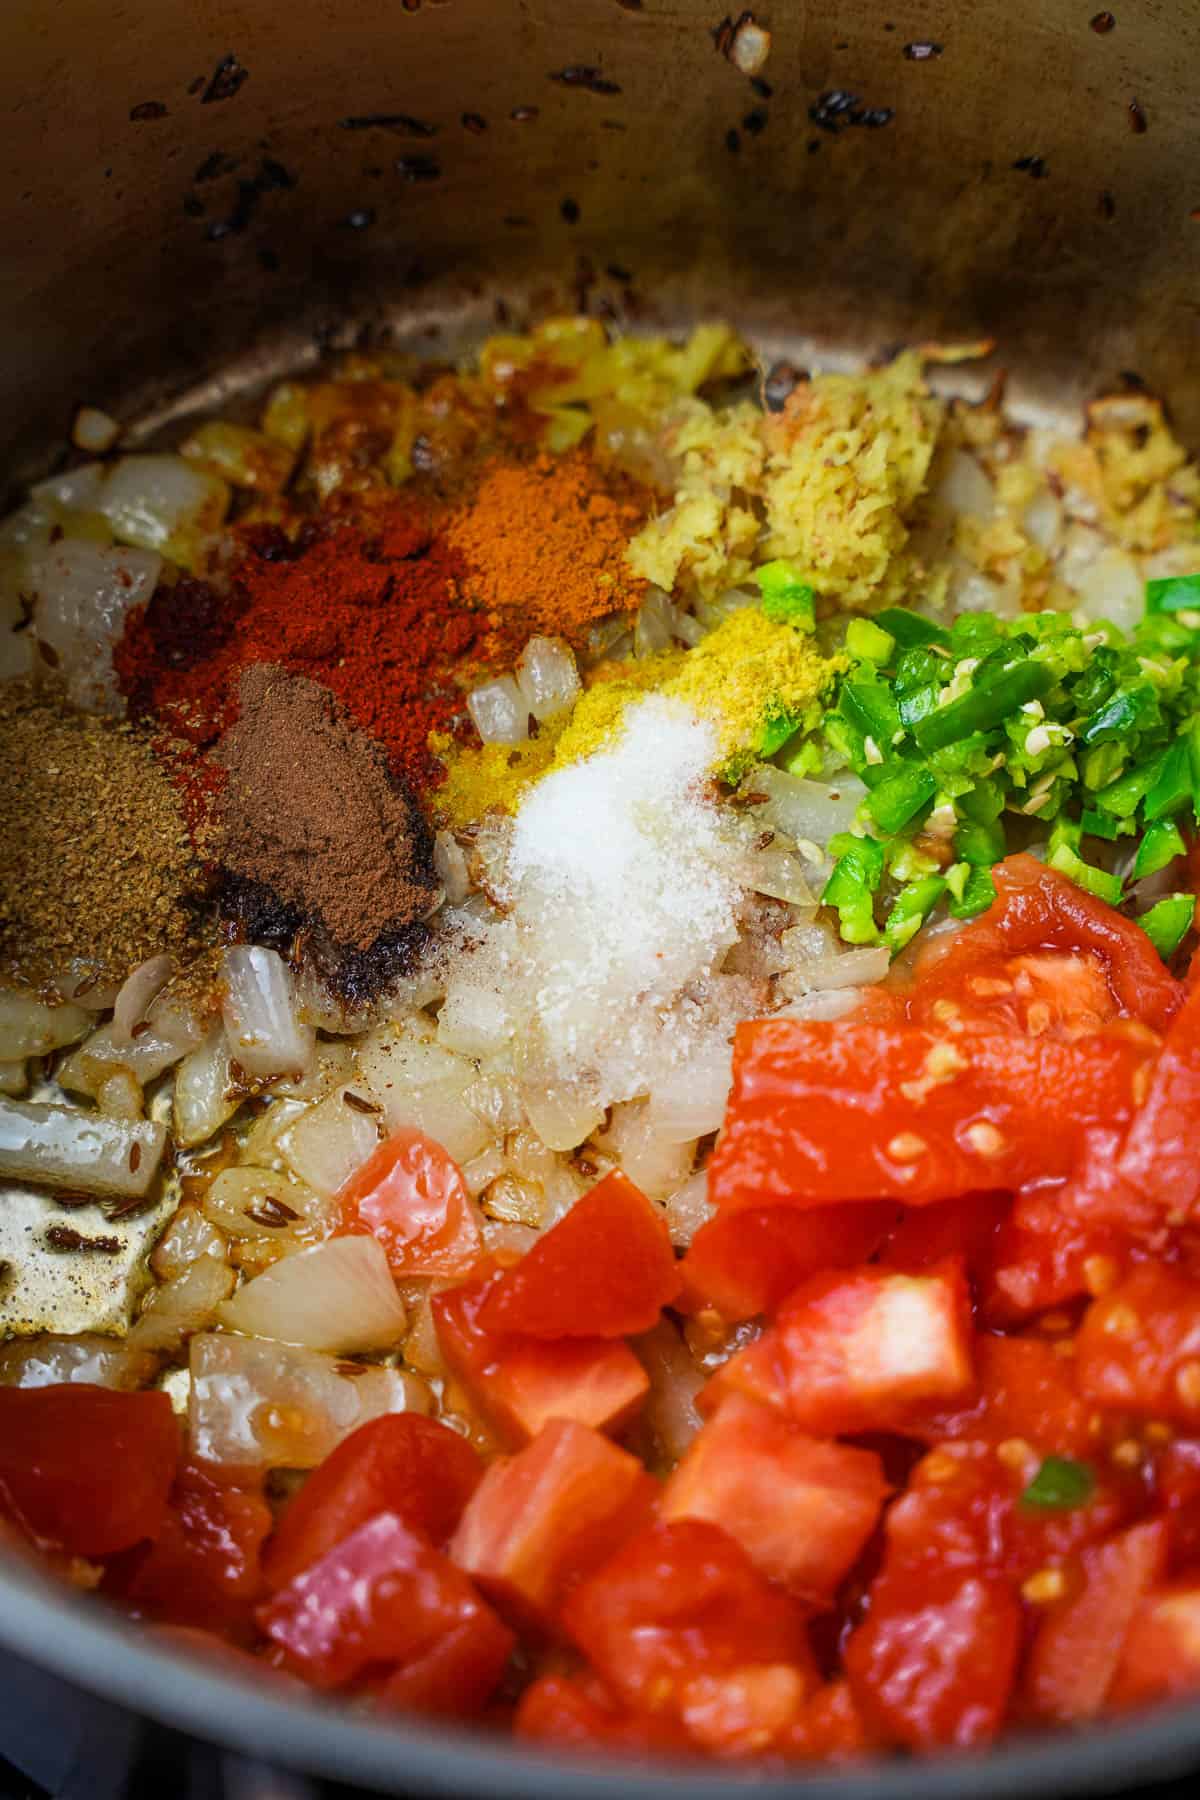 Spices, chilies, ginger, and tomatoes are added to the onions, and cumin seeds being sauteed in a stainless steel pot.